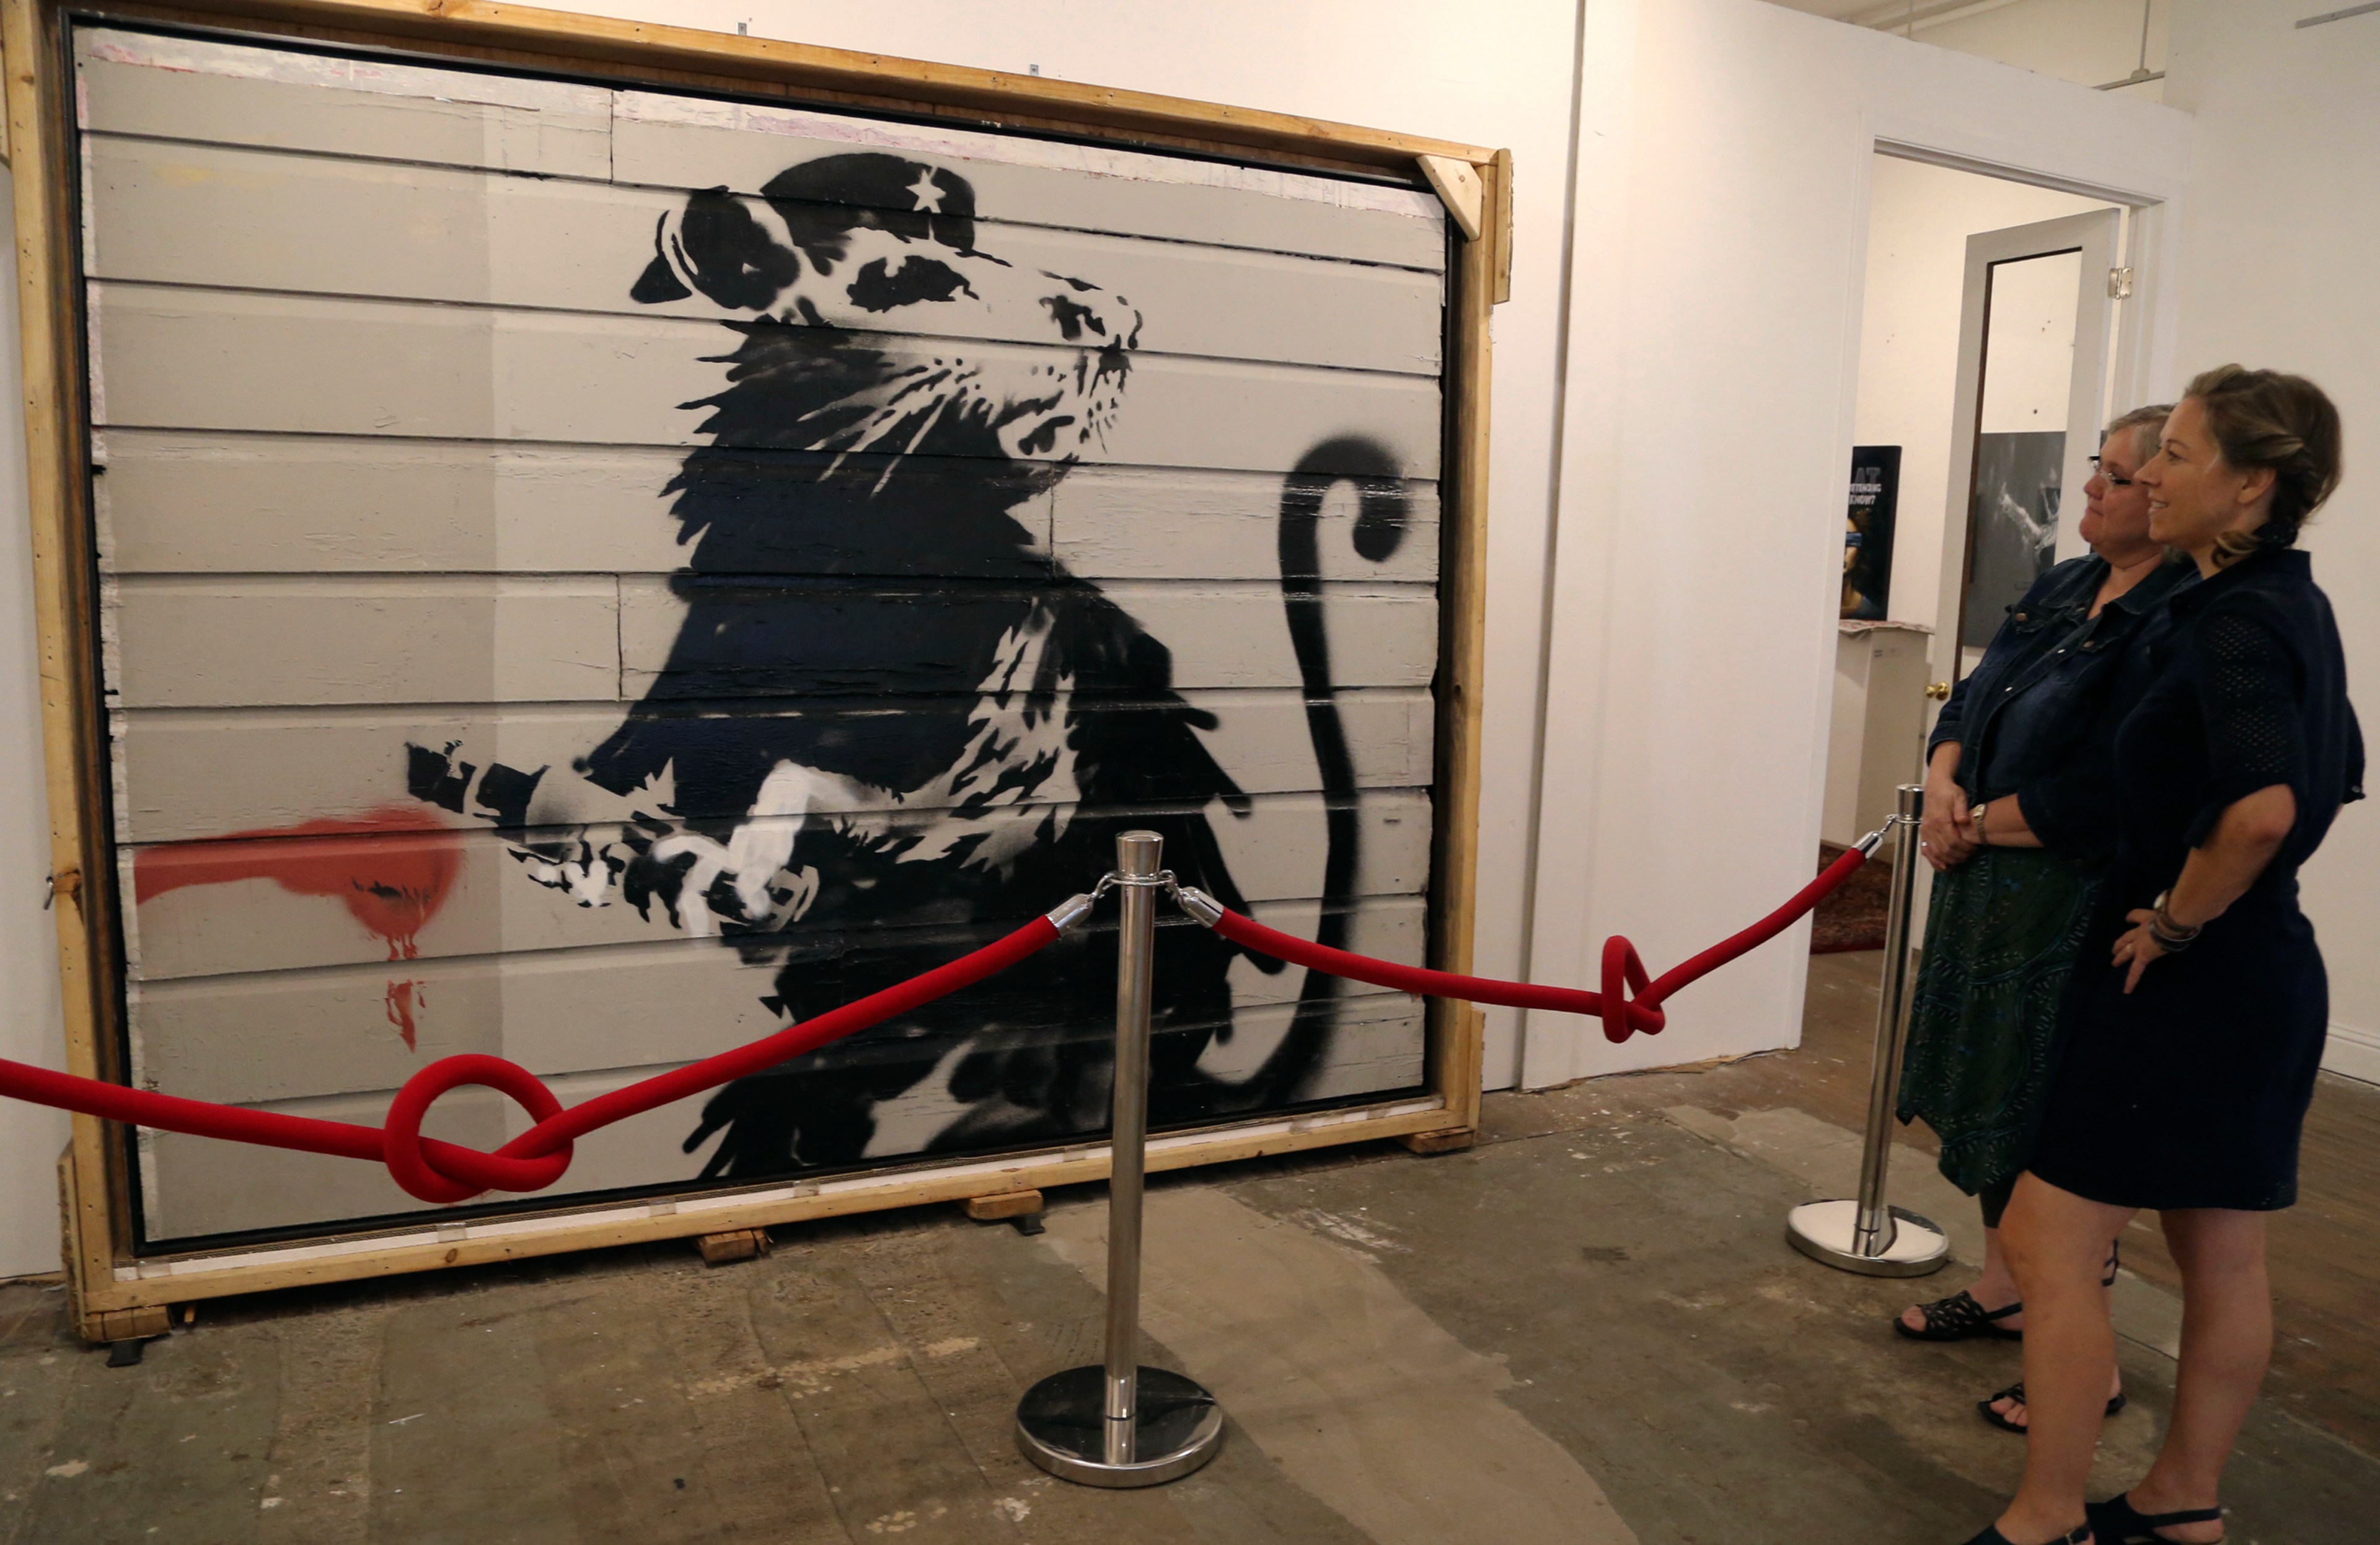 A graffiti painting of a rat is displayed in a museum.